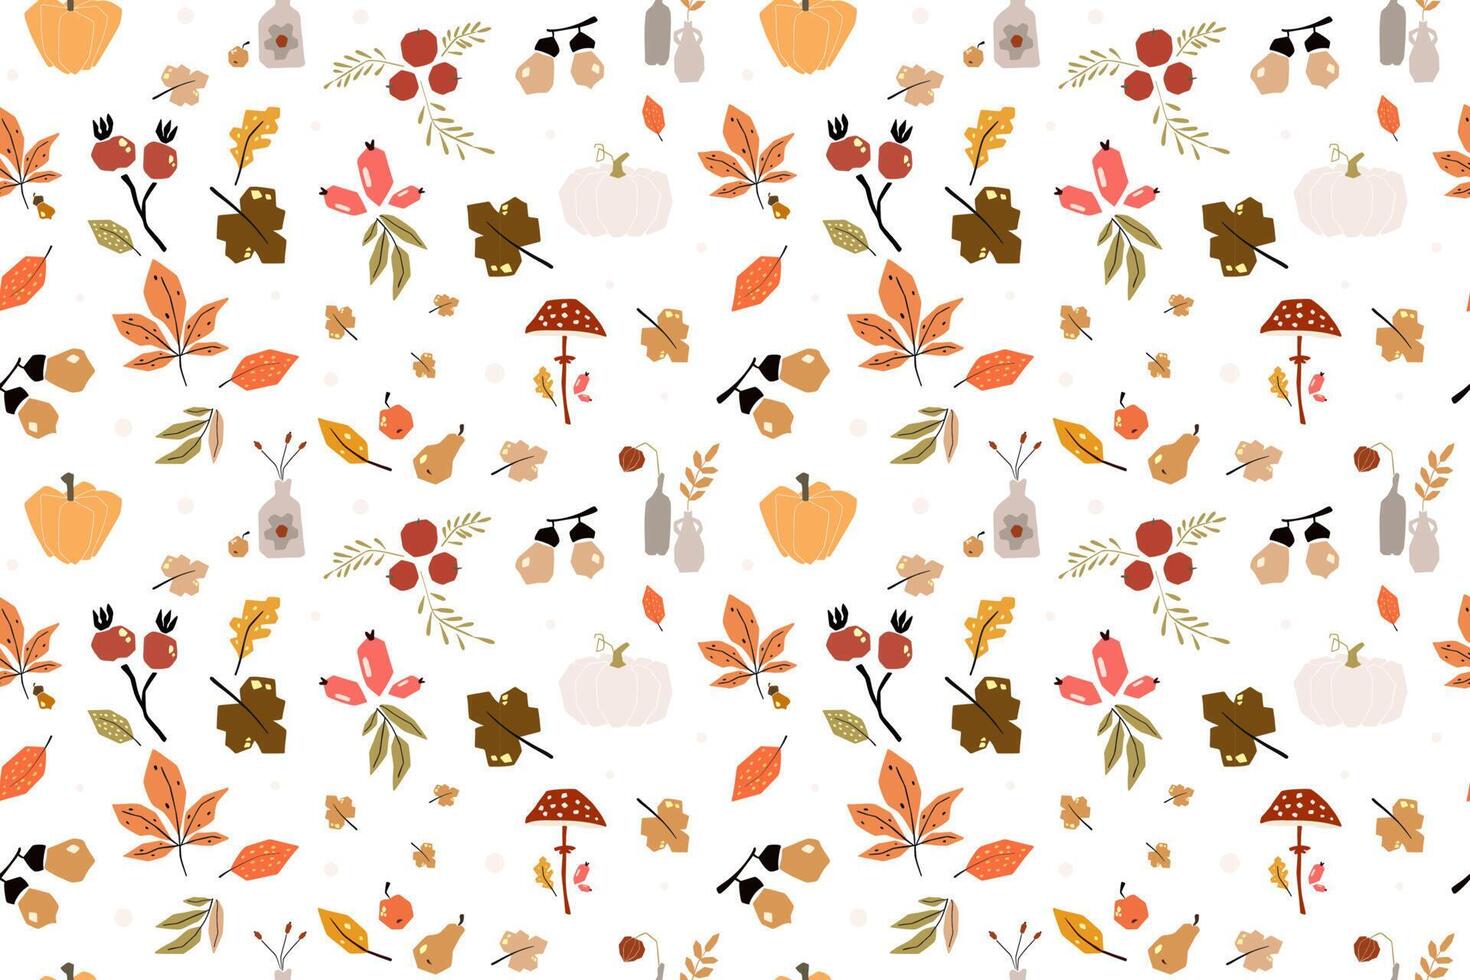 Seamless pattern with acorns and autumn oak leaves in Orange, Beige, Brown and Yellow. Perfect for wallpaper, gift paper, pattern fills, web page background, autumn greeting cards. vector